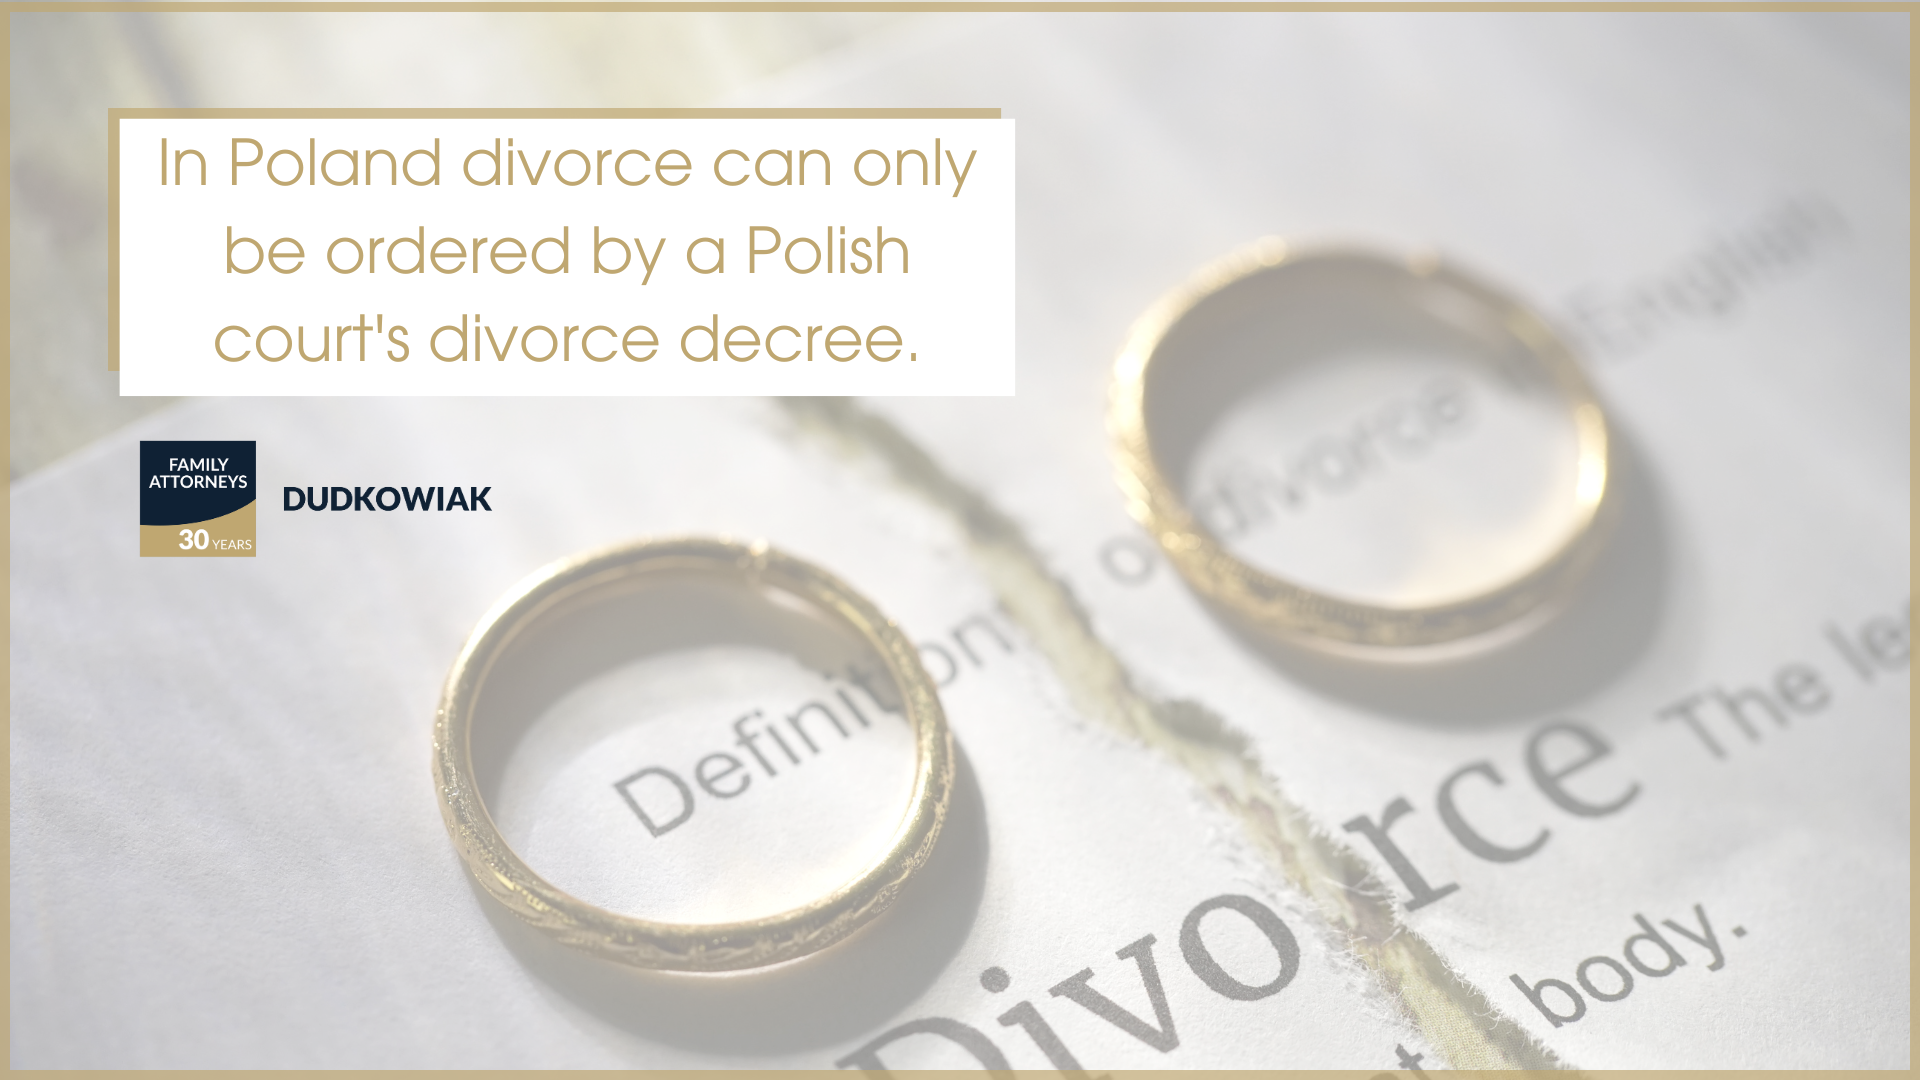 In Poland divorce can only be ordered by a Polish court's divorce decree.